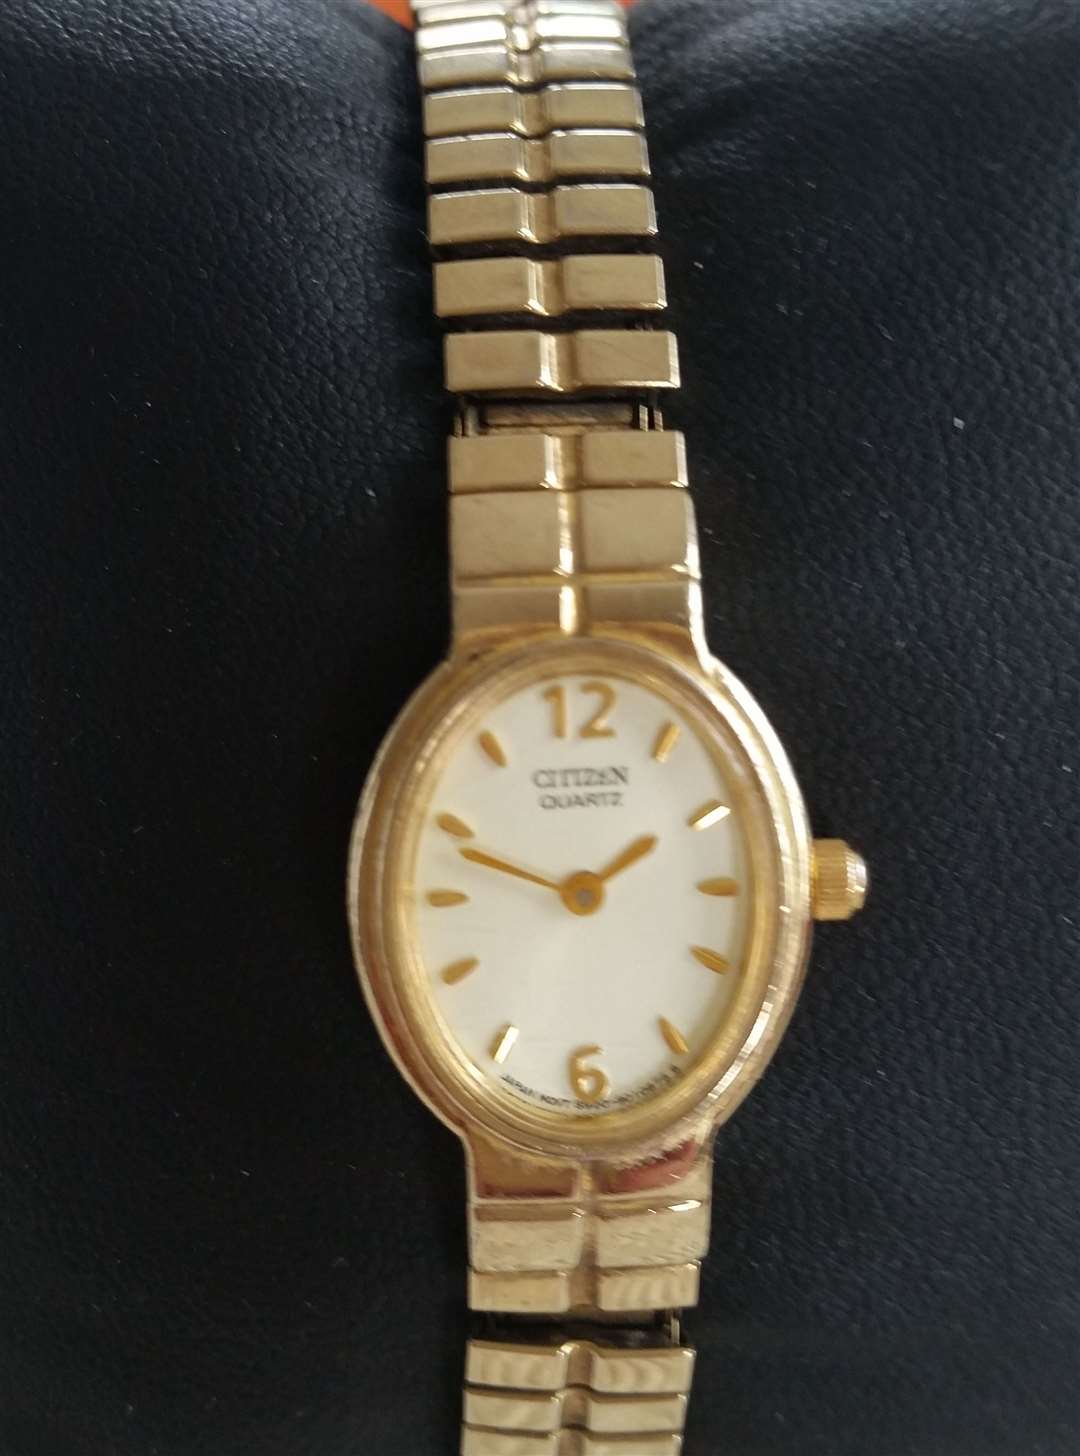 The watch stolen during the burglary in Paddock Wood Picture: Kent Police